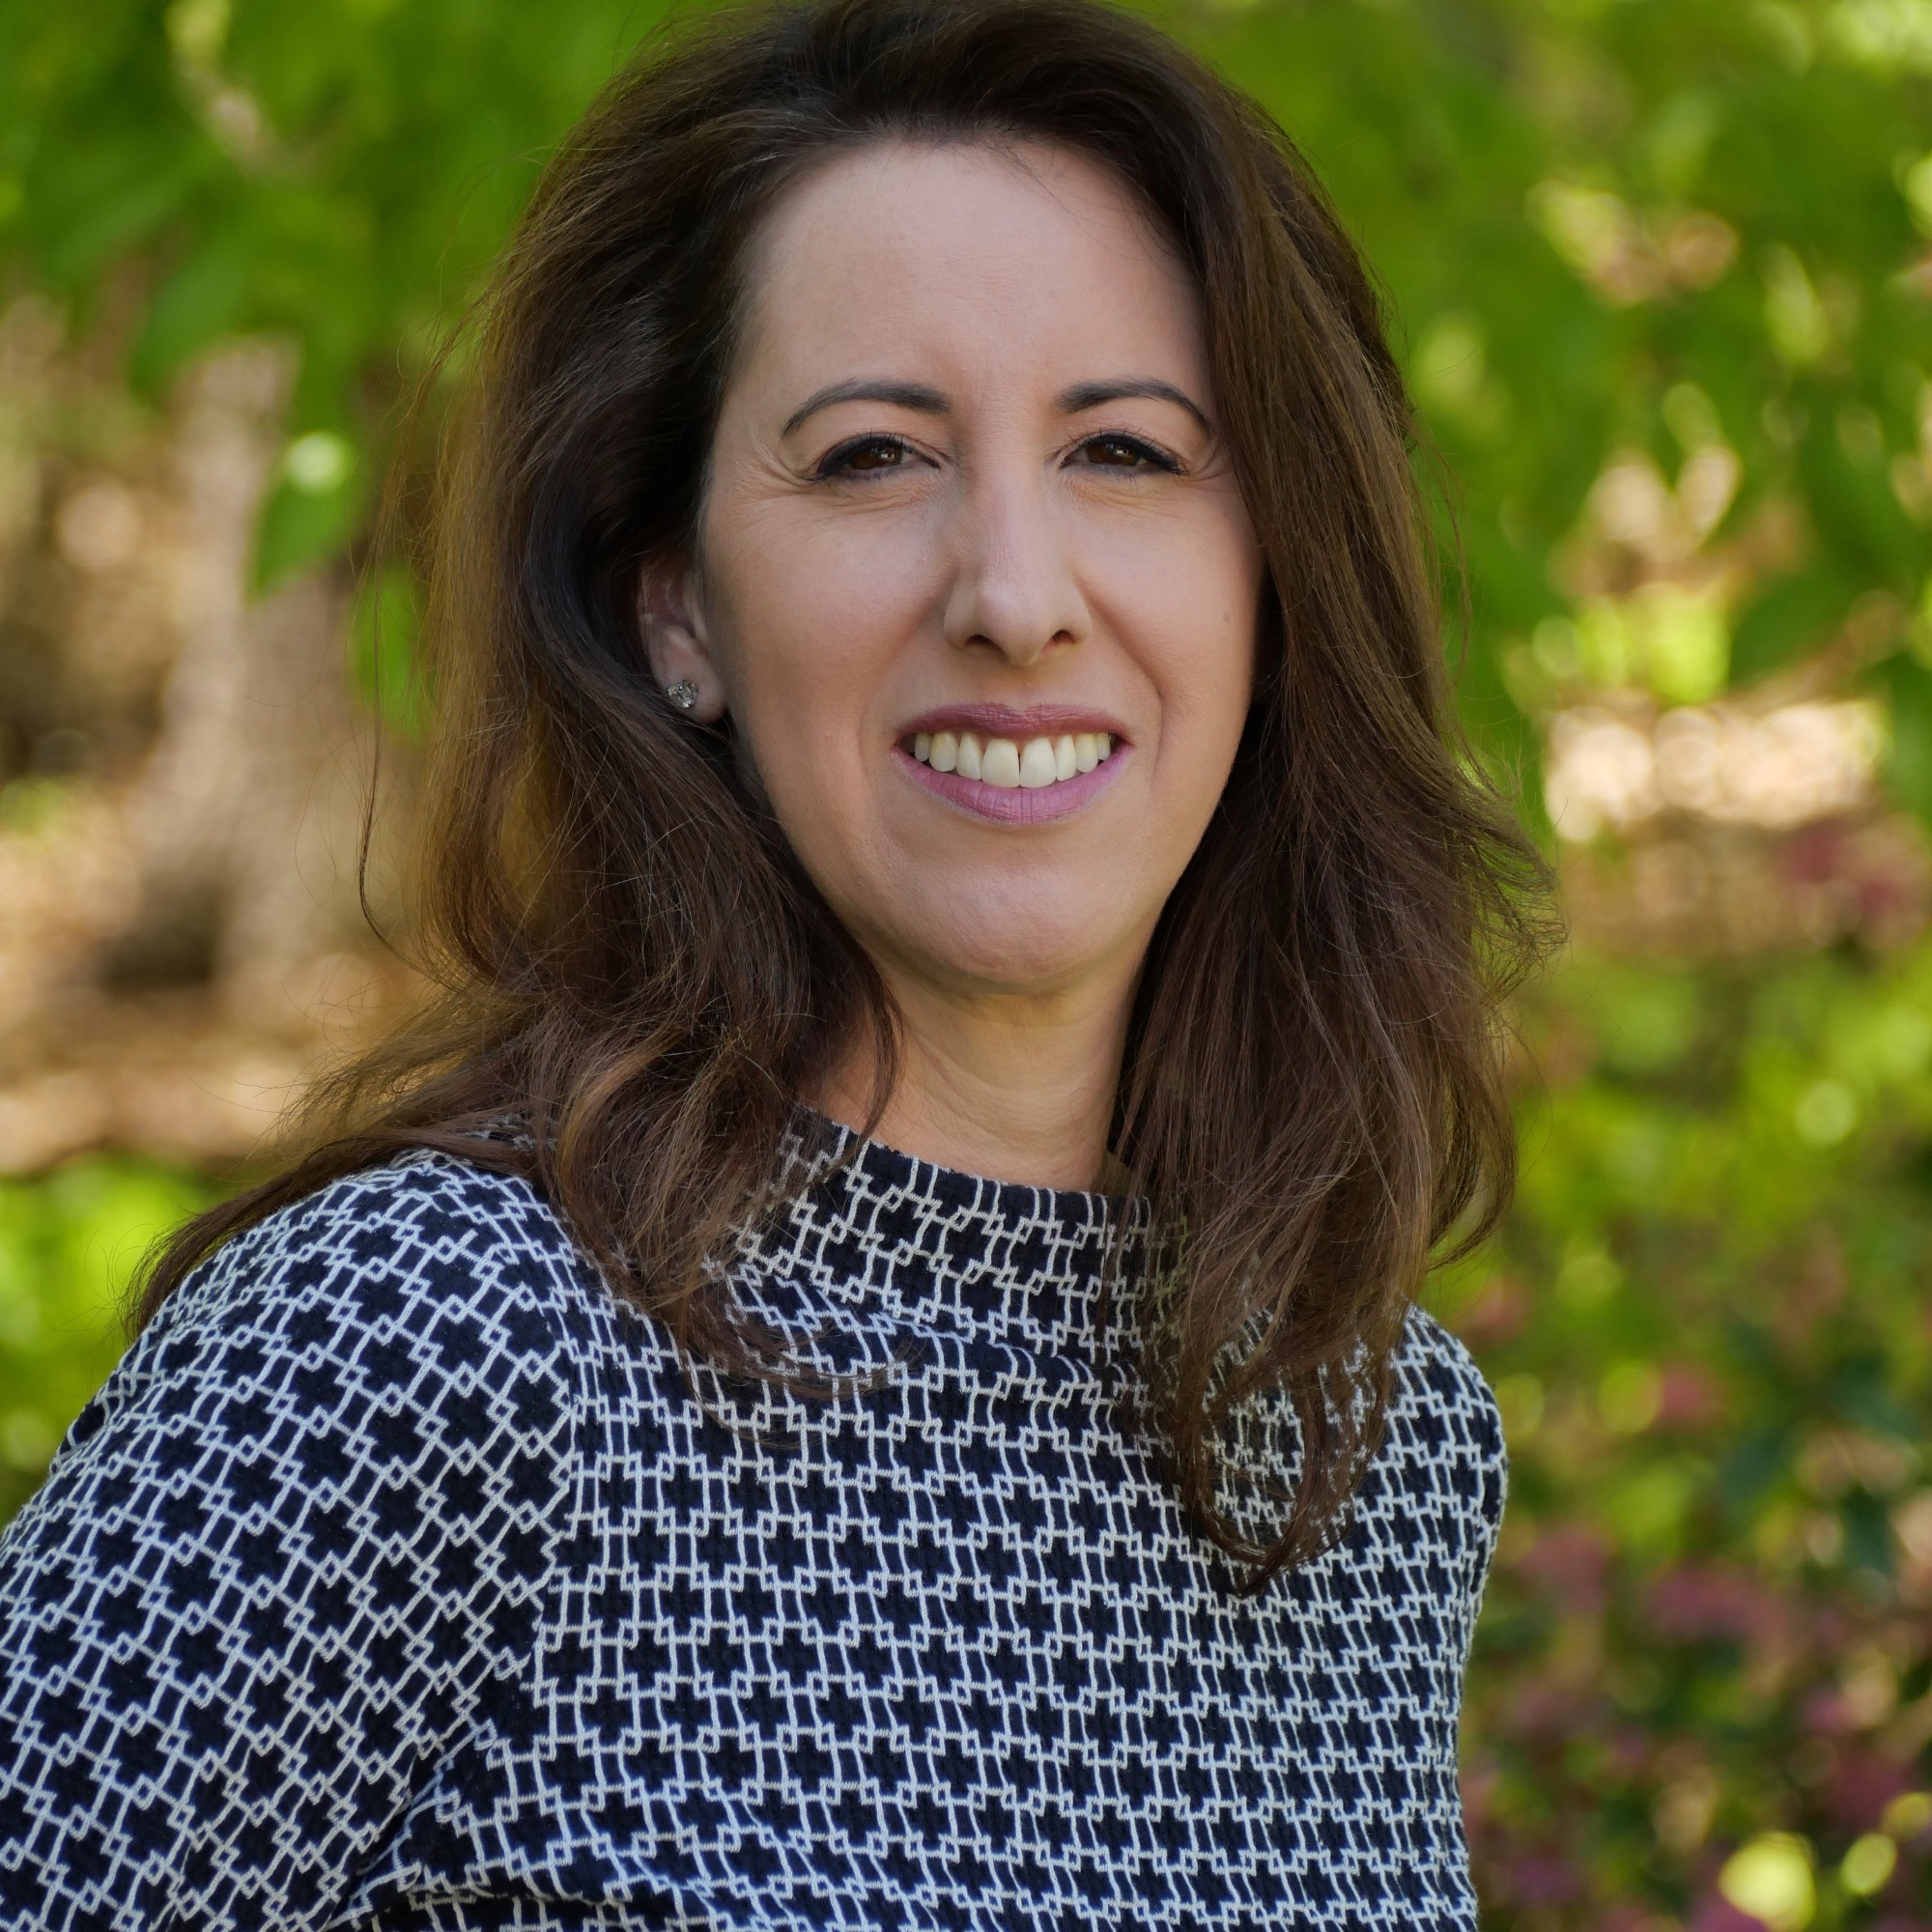 Lauren Saltman, professional organizer and founder of Living. Simplified, a woman with dark hair wearing a black and white patterned blouse pictured against a blurred garden background